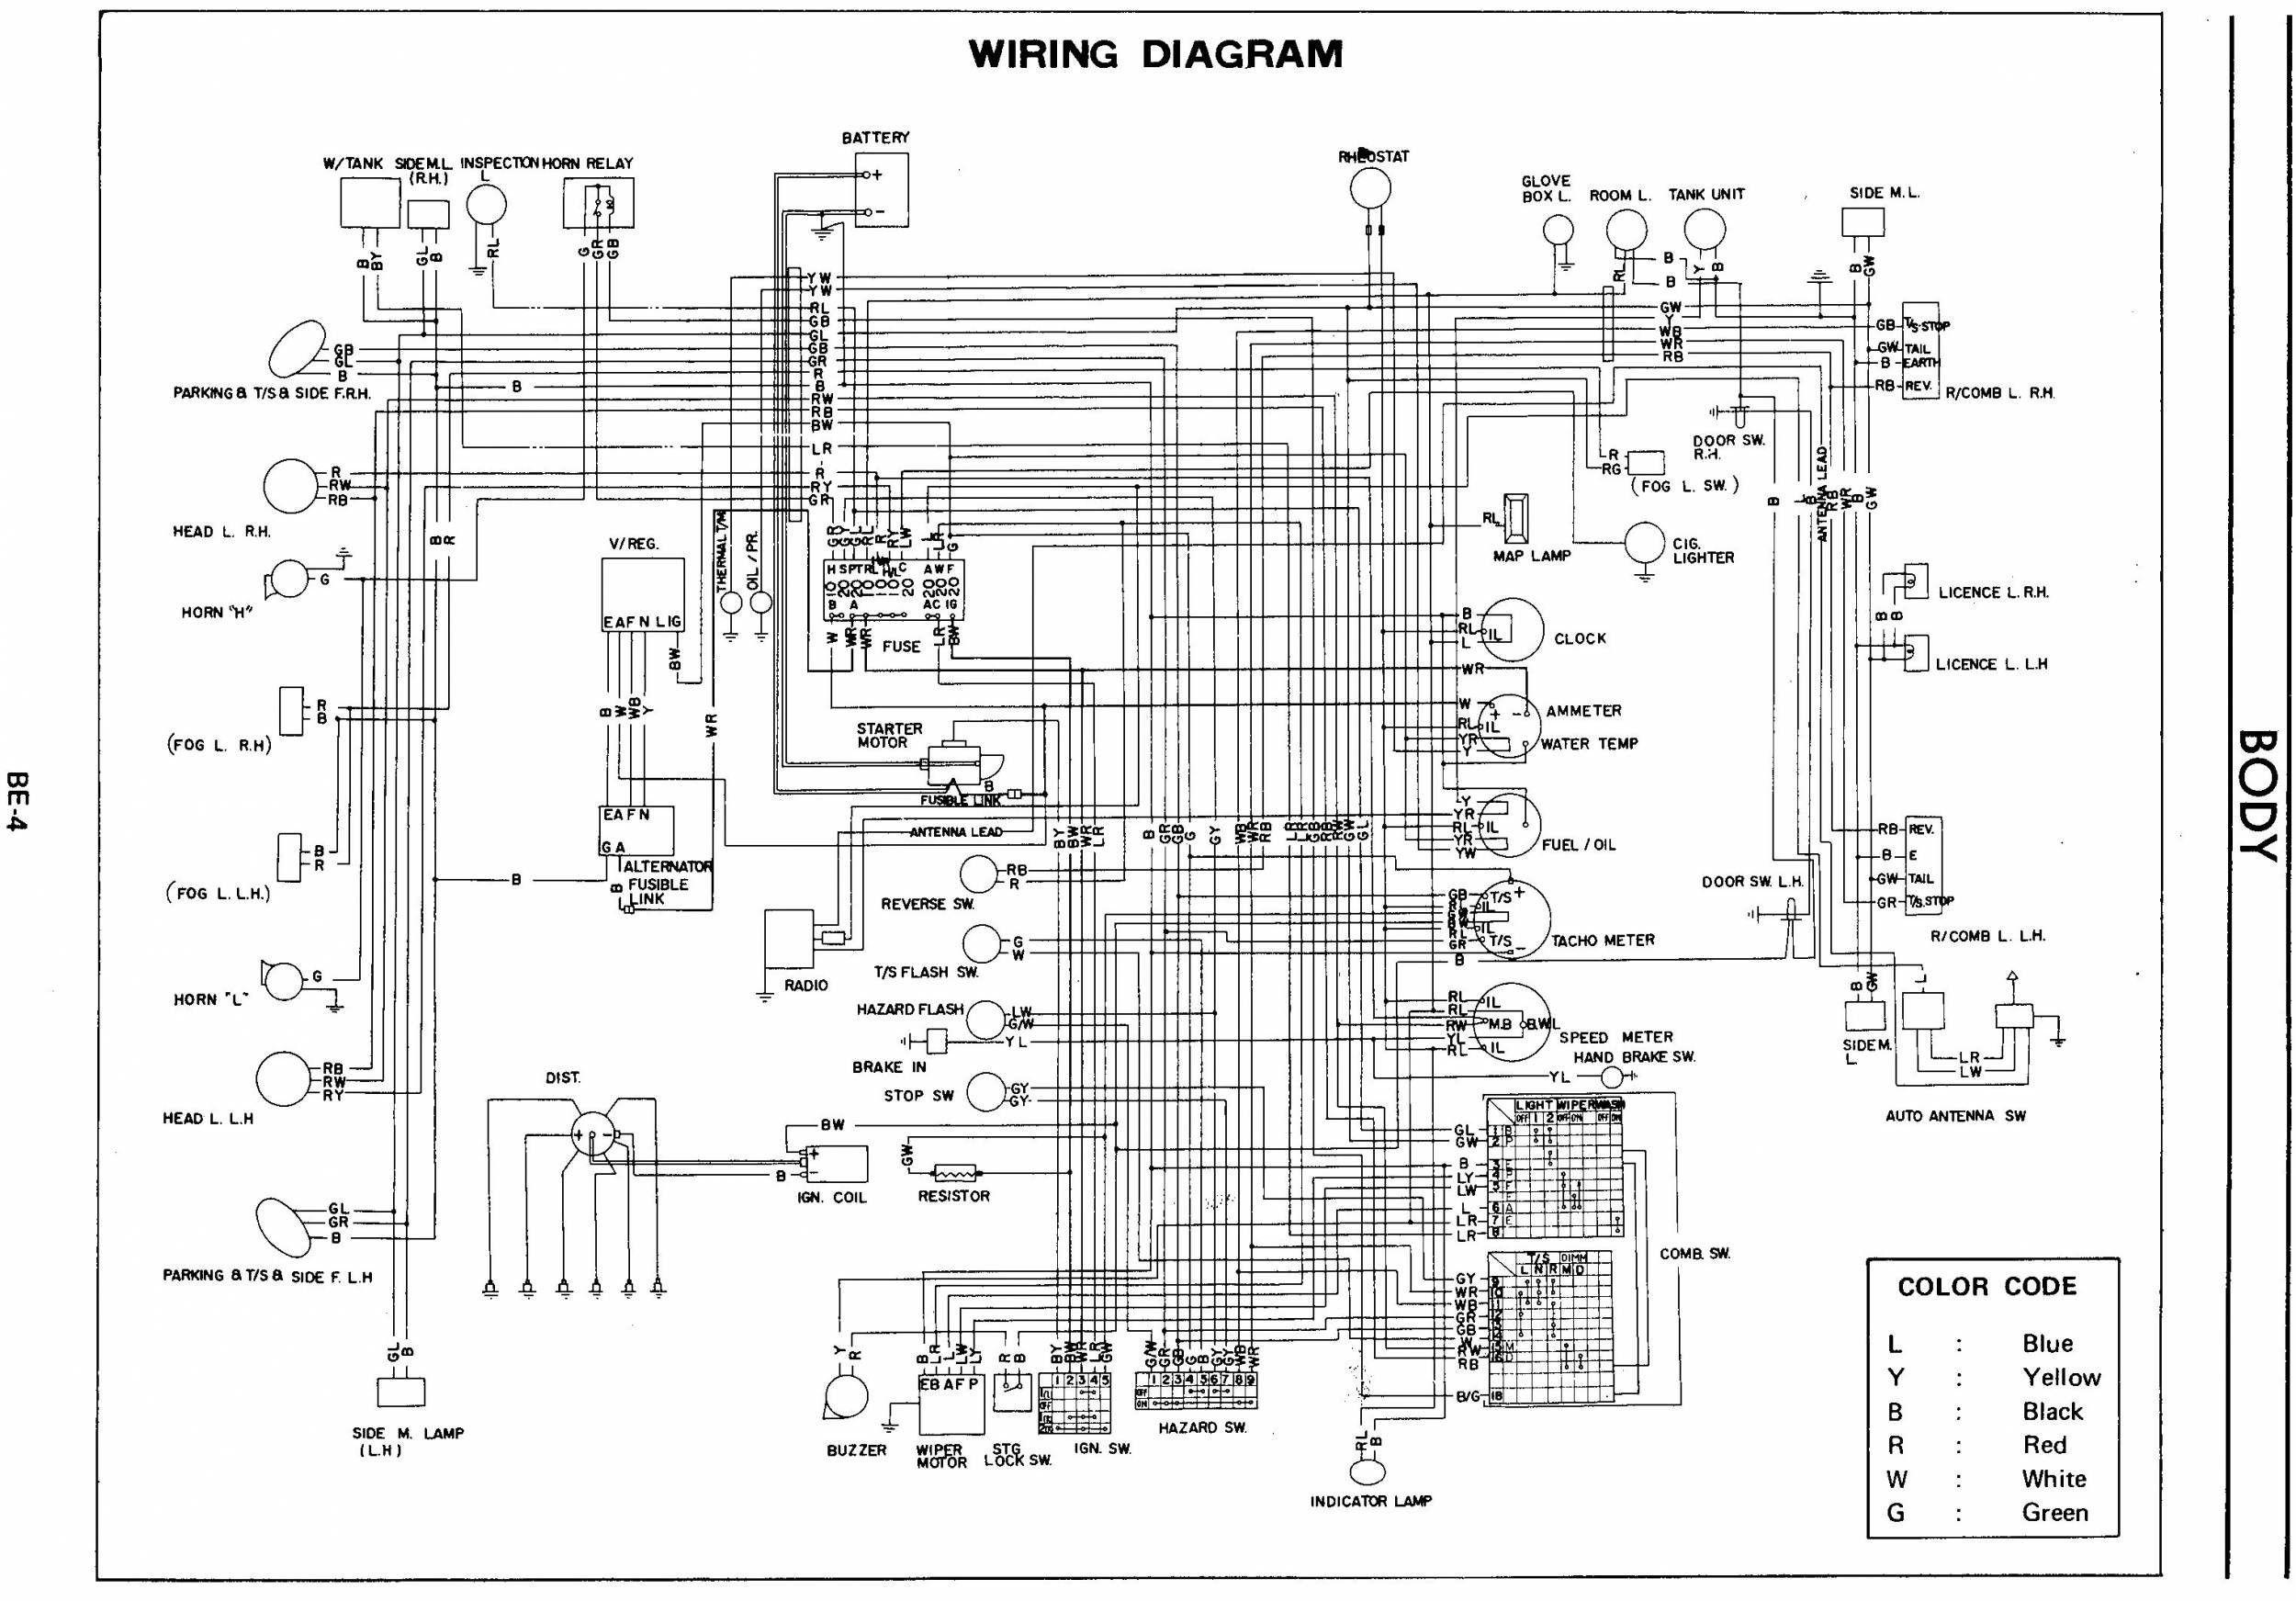 clarion wiring diagram library and nz500